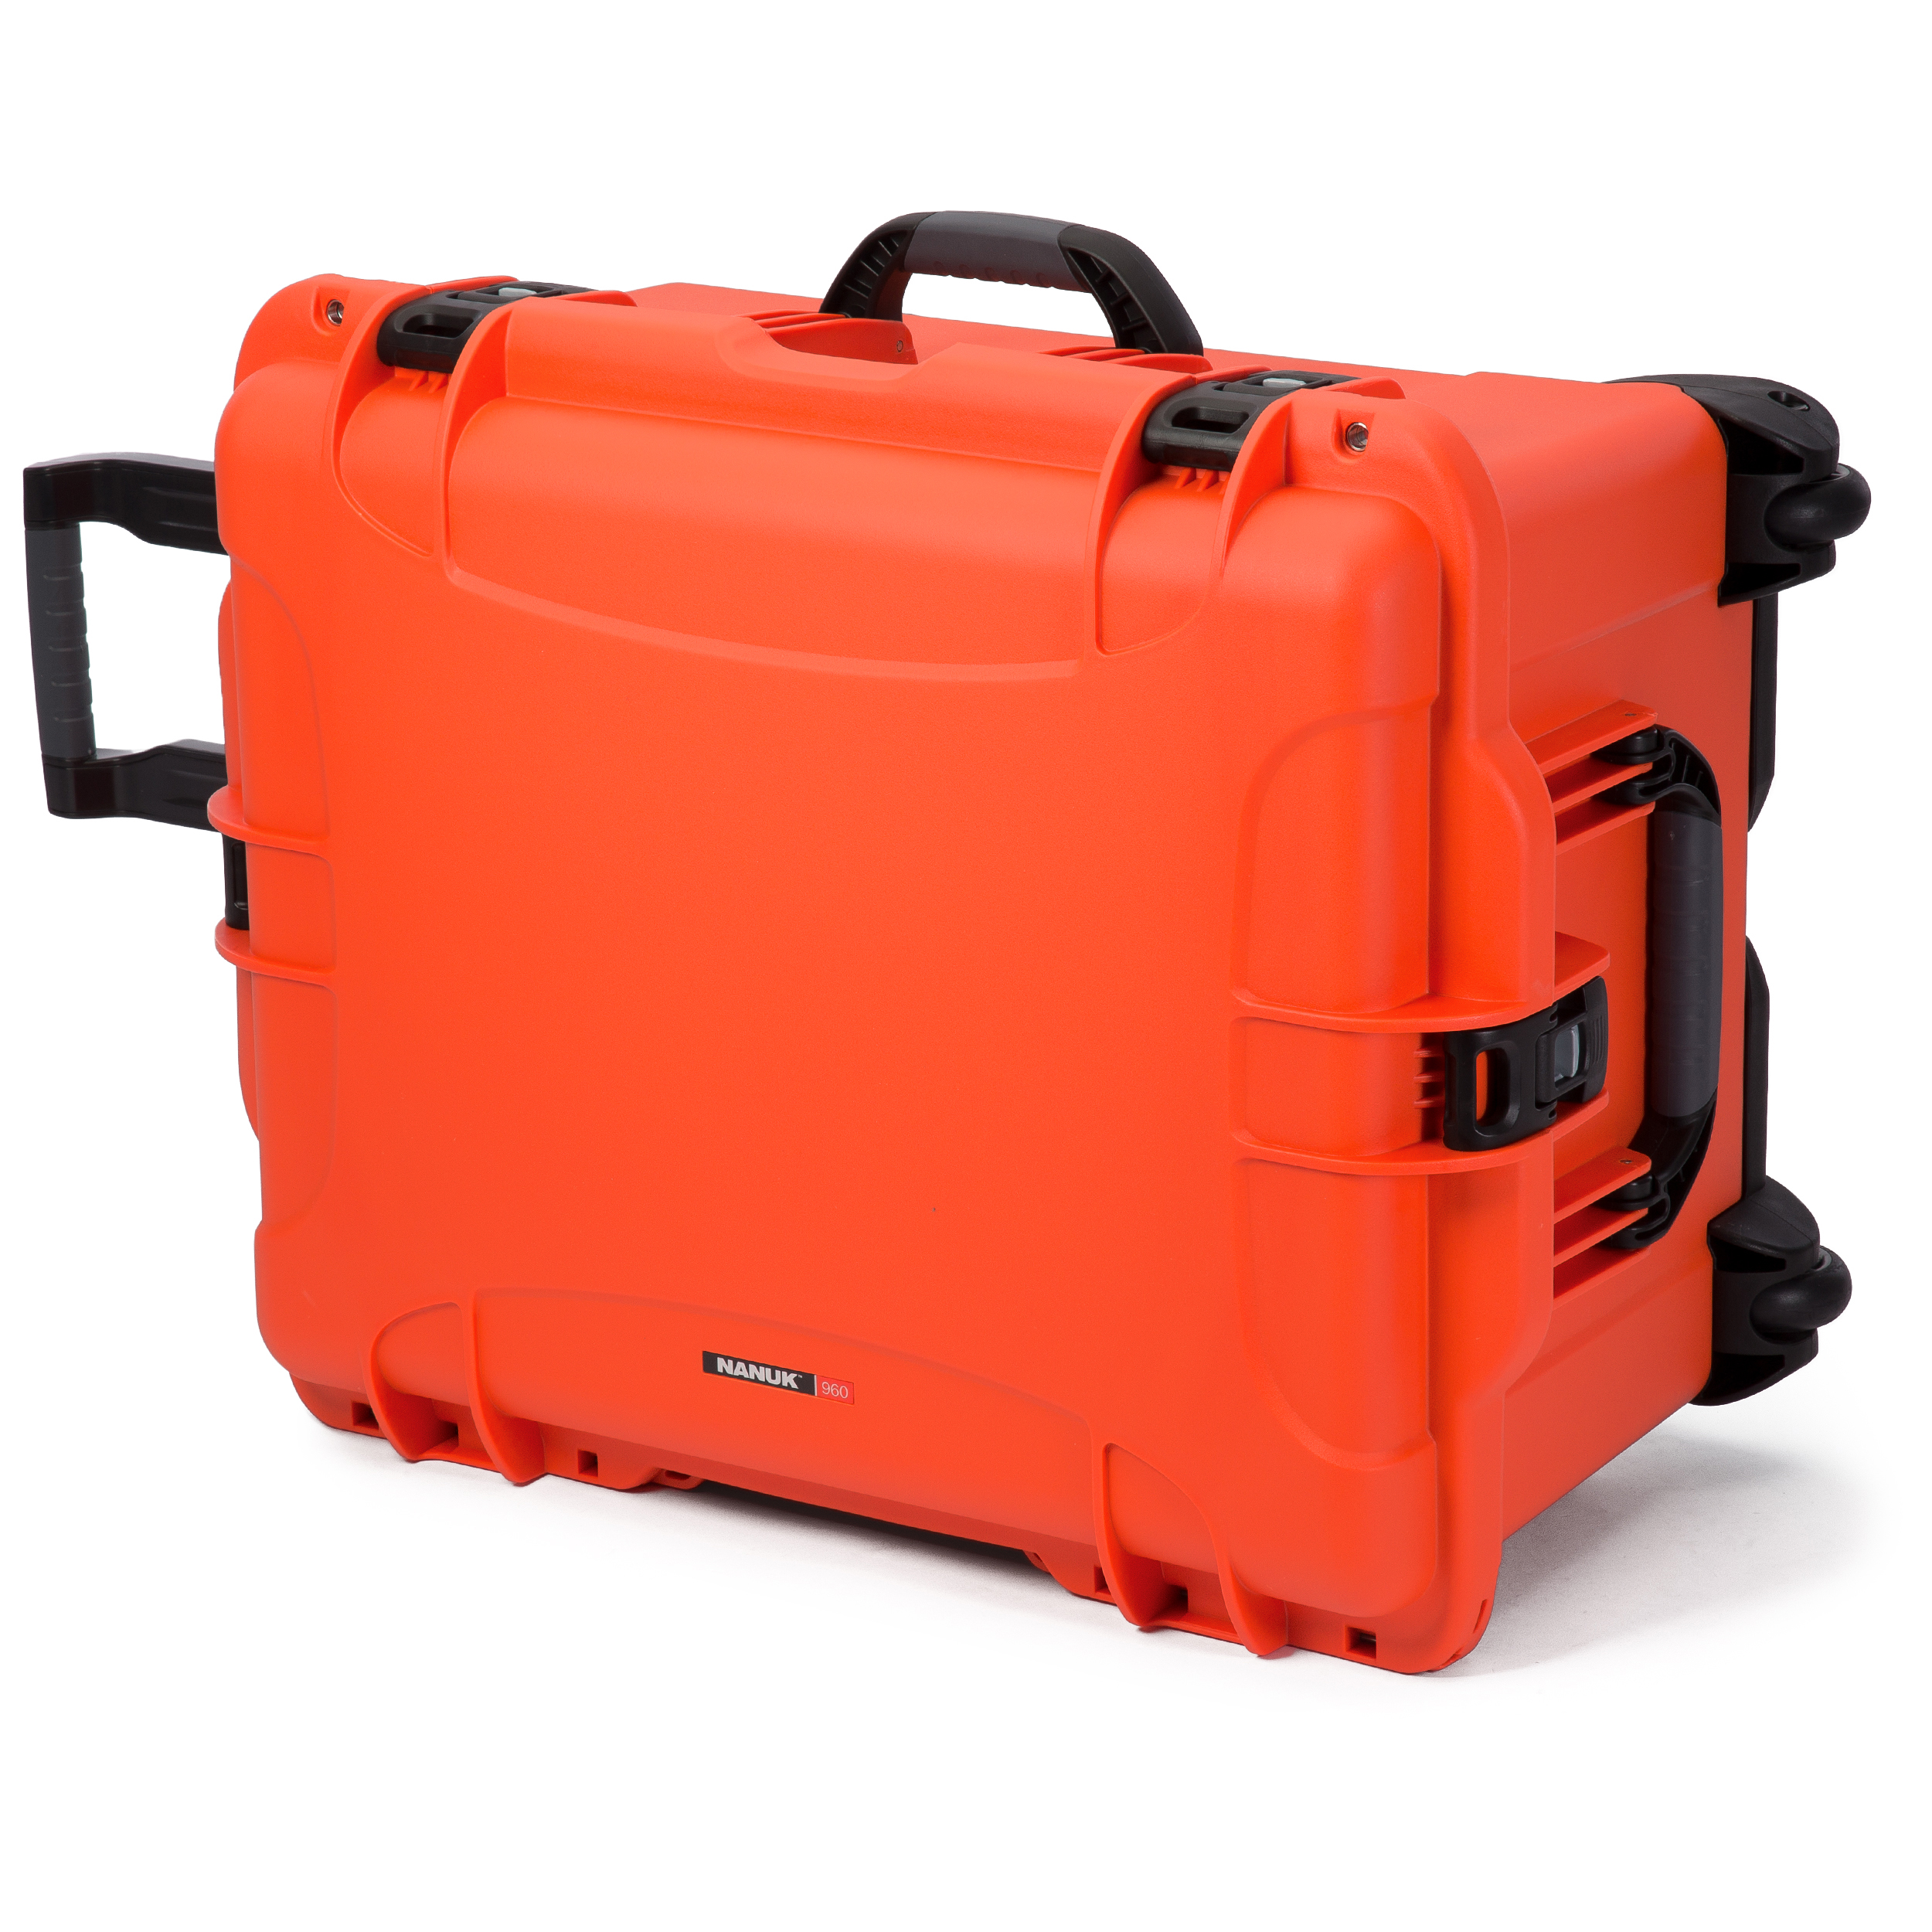 Nanuk 960-0003 Hard Plastic Rolling case with Wheels - image 1 of 3